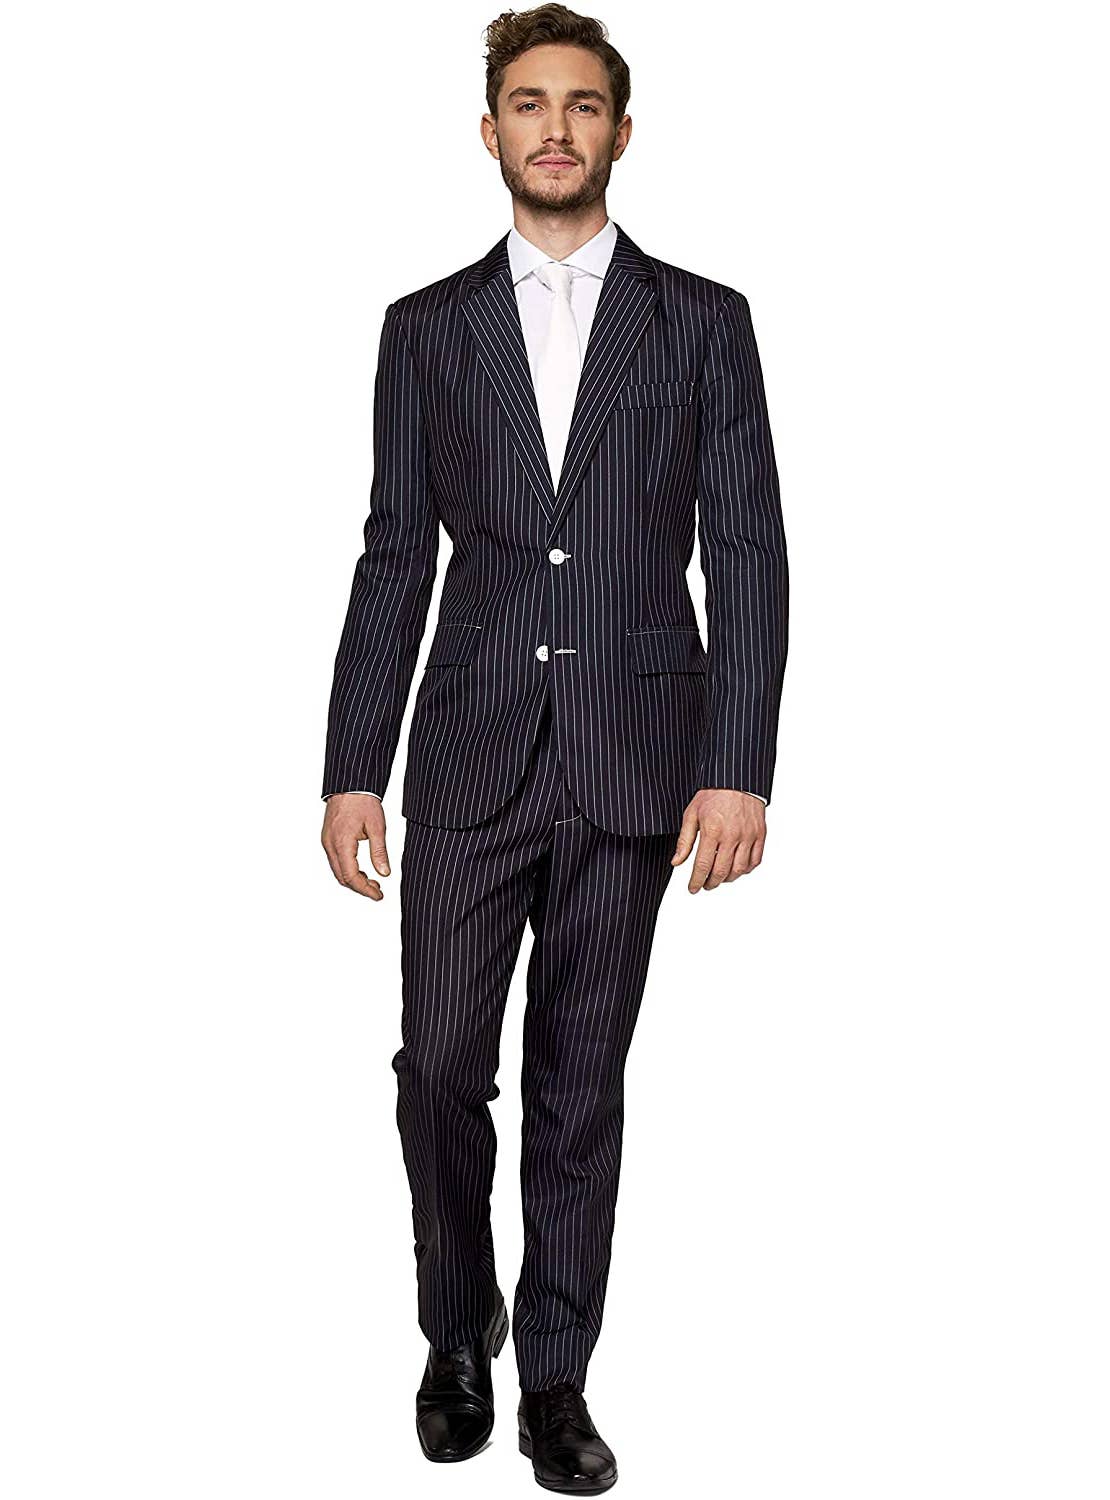 Men's Black and White Gangster Costume Suit - Front Image